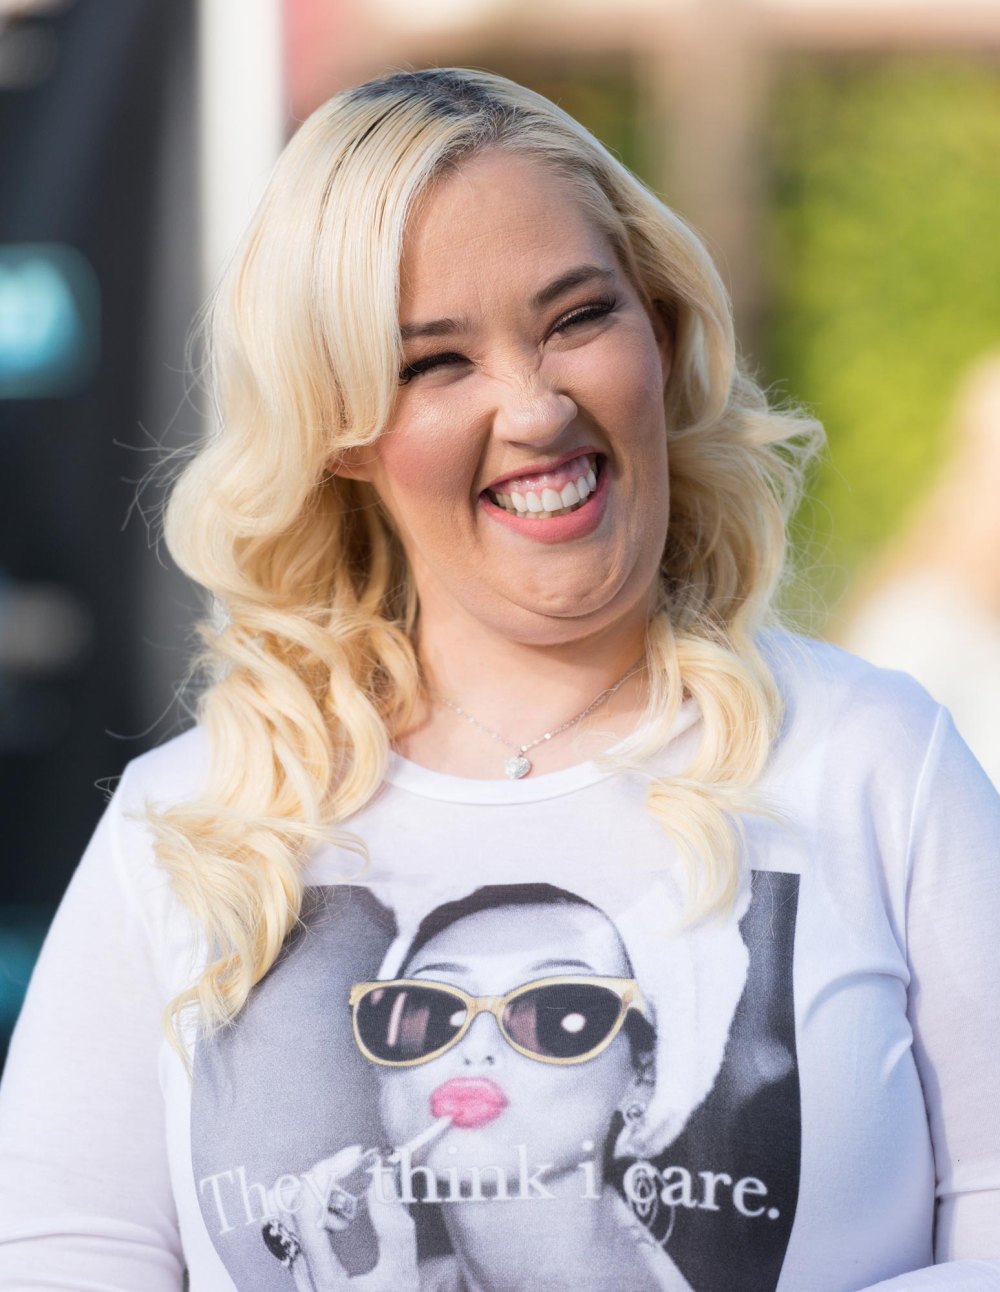 Mama June Shannon says she's been sober for three years